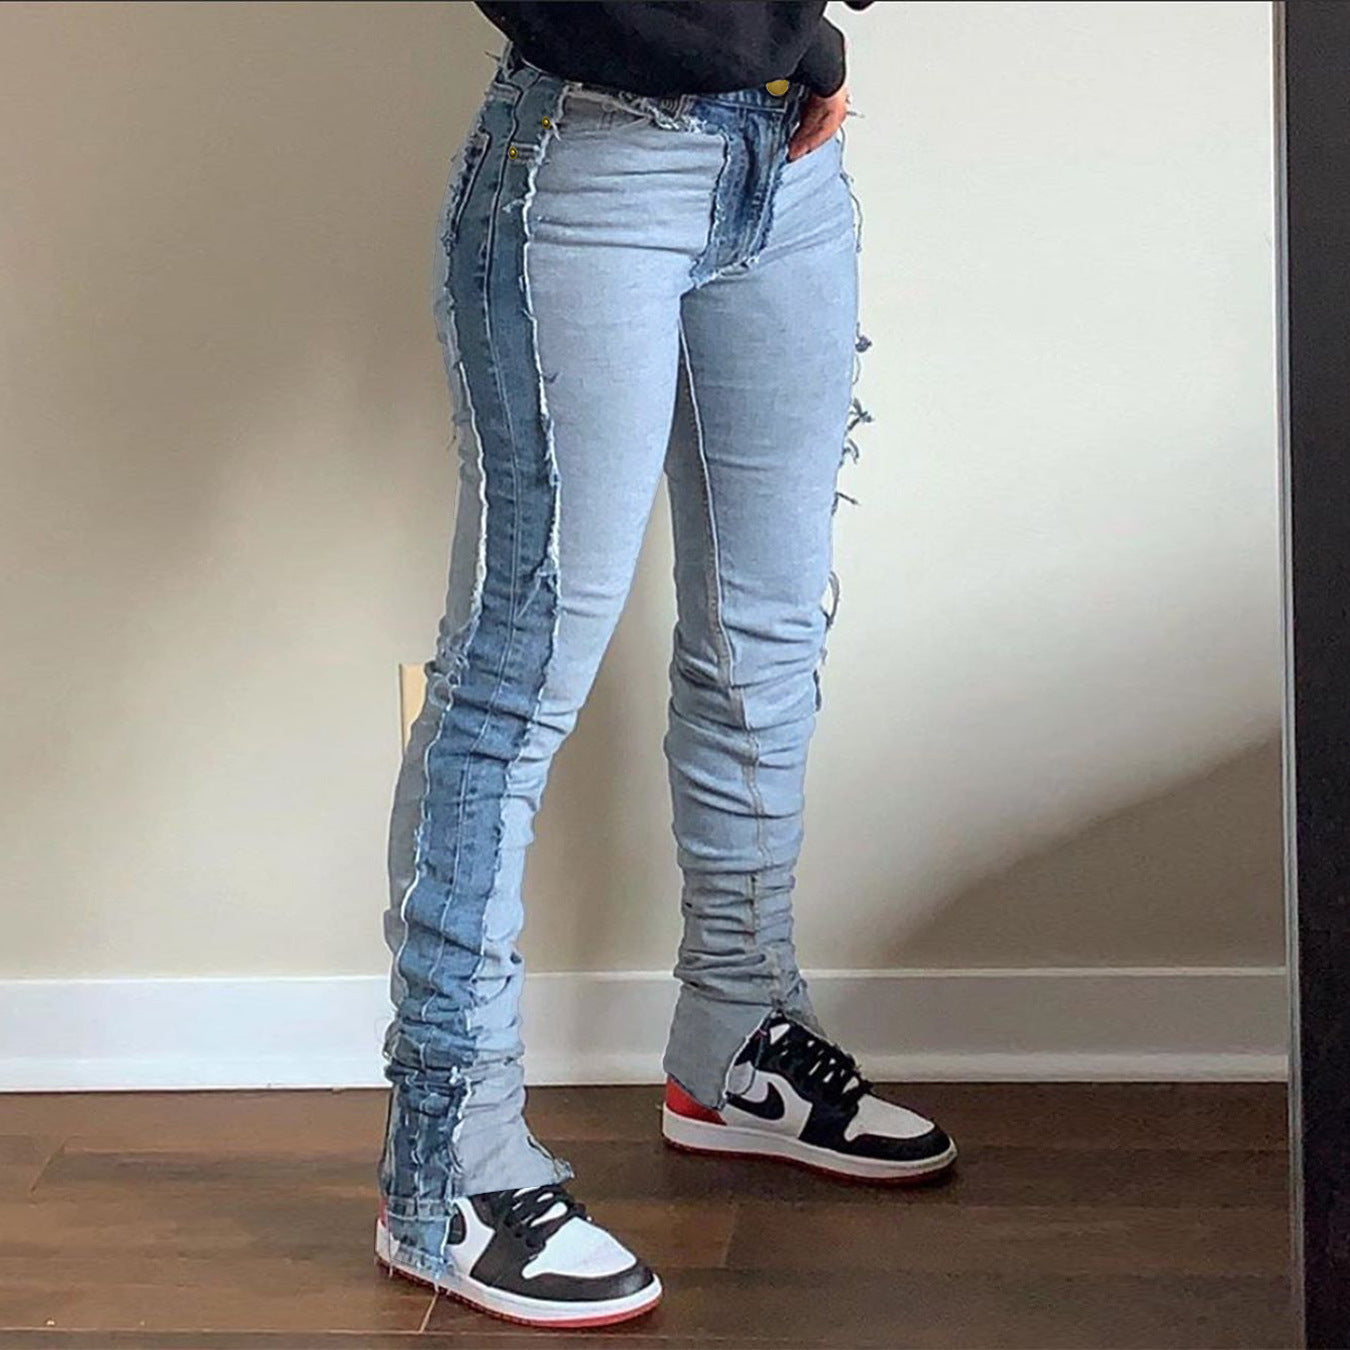 Two-Toned Inverted Denim Jeans